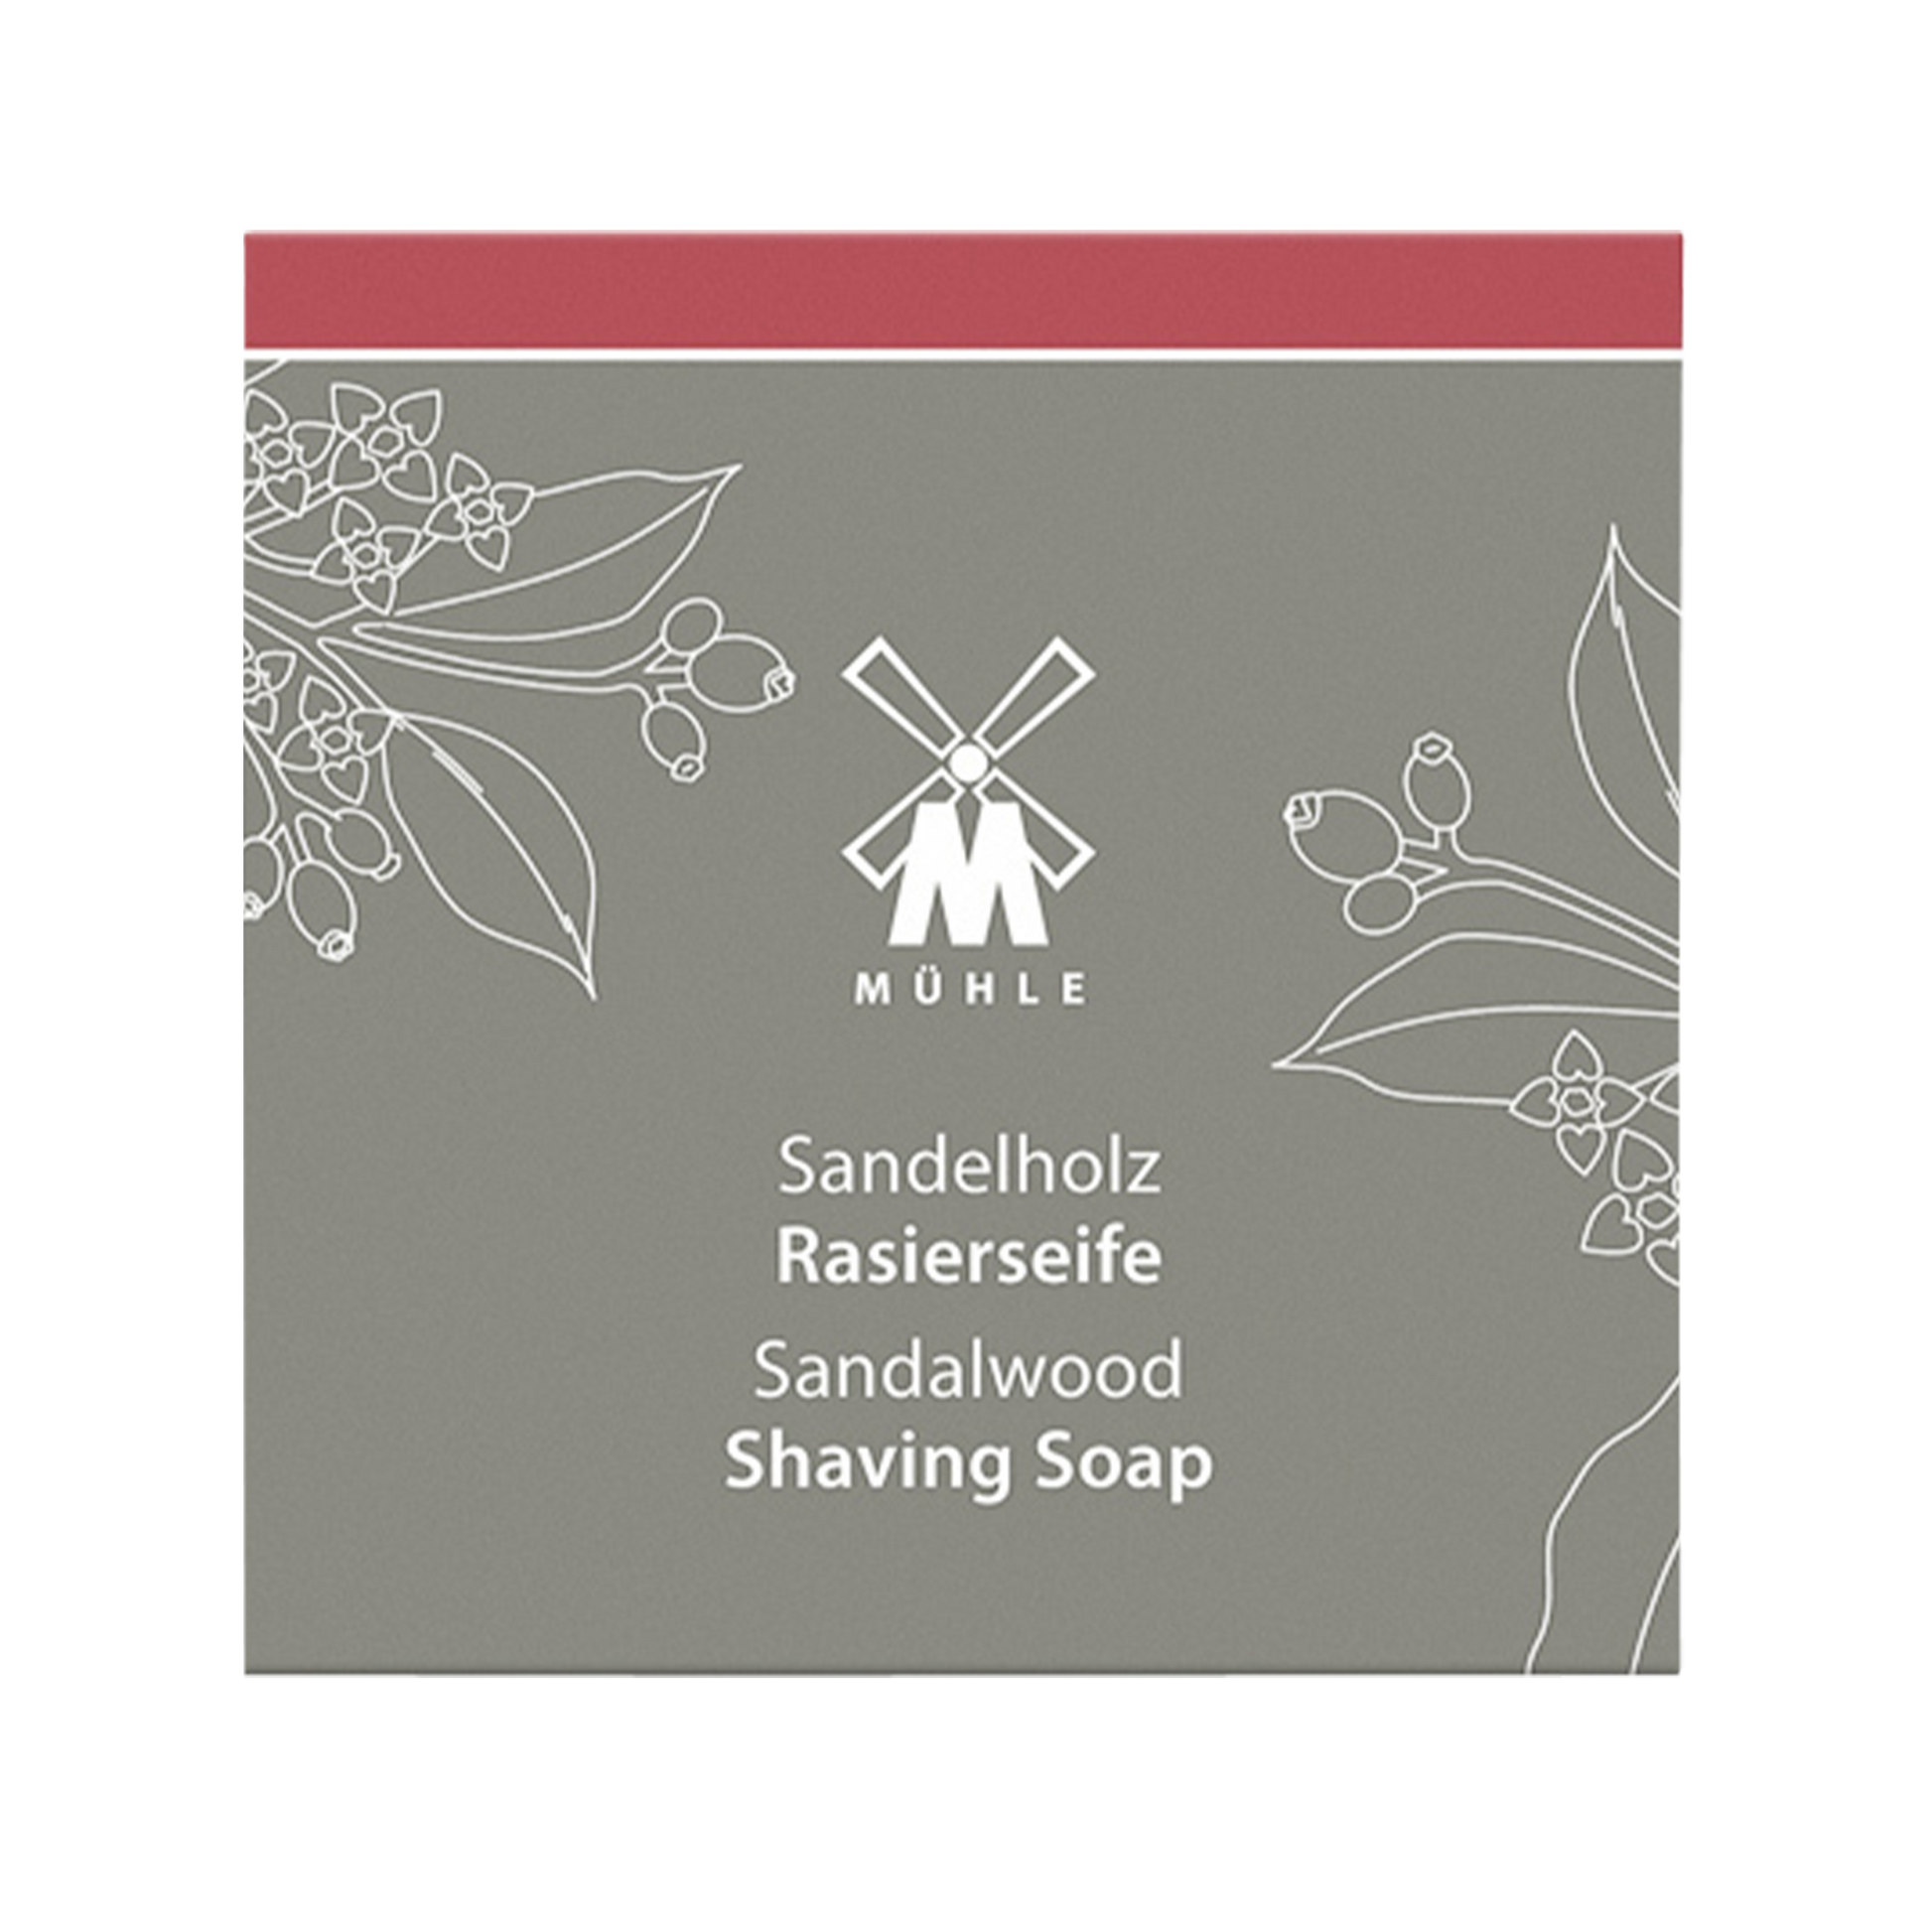 MUHLE Sandalwood Shaving Soap: Since the 18th century, shaving soaps have established themselves as essential care products for wet shaving. Rich yet light, the MÜHLE shaving soap develops a lightly scented and nurturing lather. Fragranced from essences of the Sandalwood Tree and refined through a multi-stage distillation process, this Shaving Soap gently revitalizes and moisturizes the skin. Classy and distinctive, this fragrance contains fine notes of coriander, star anise and deep balsamic wood.